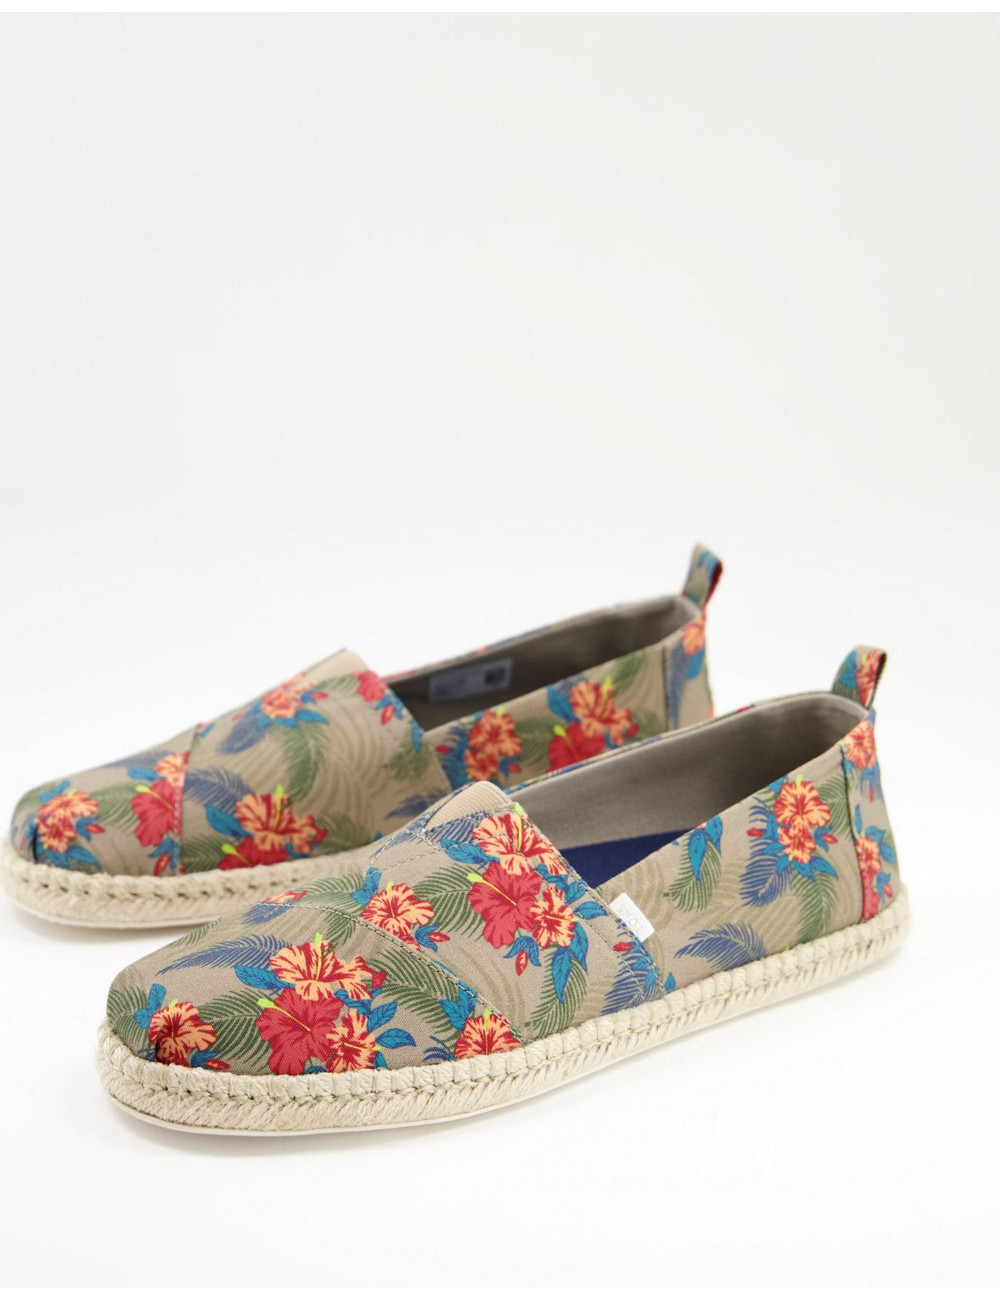 Toms espadrille in natural